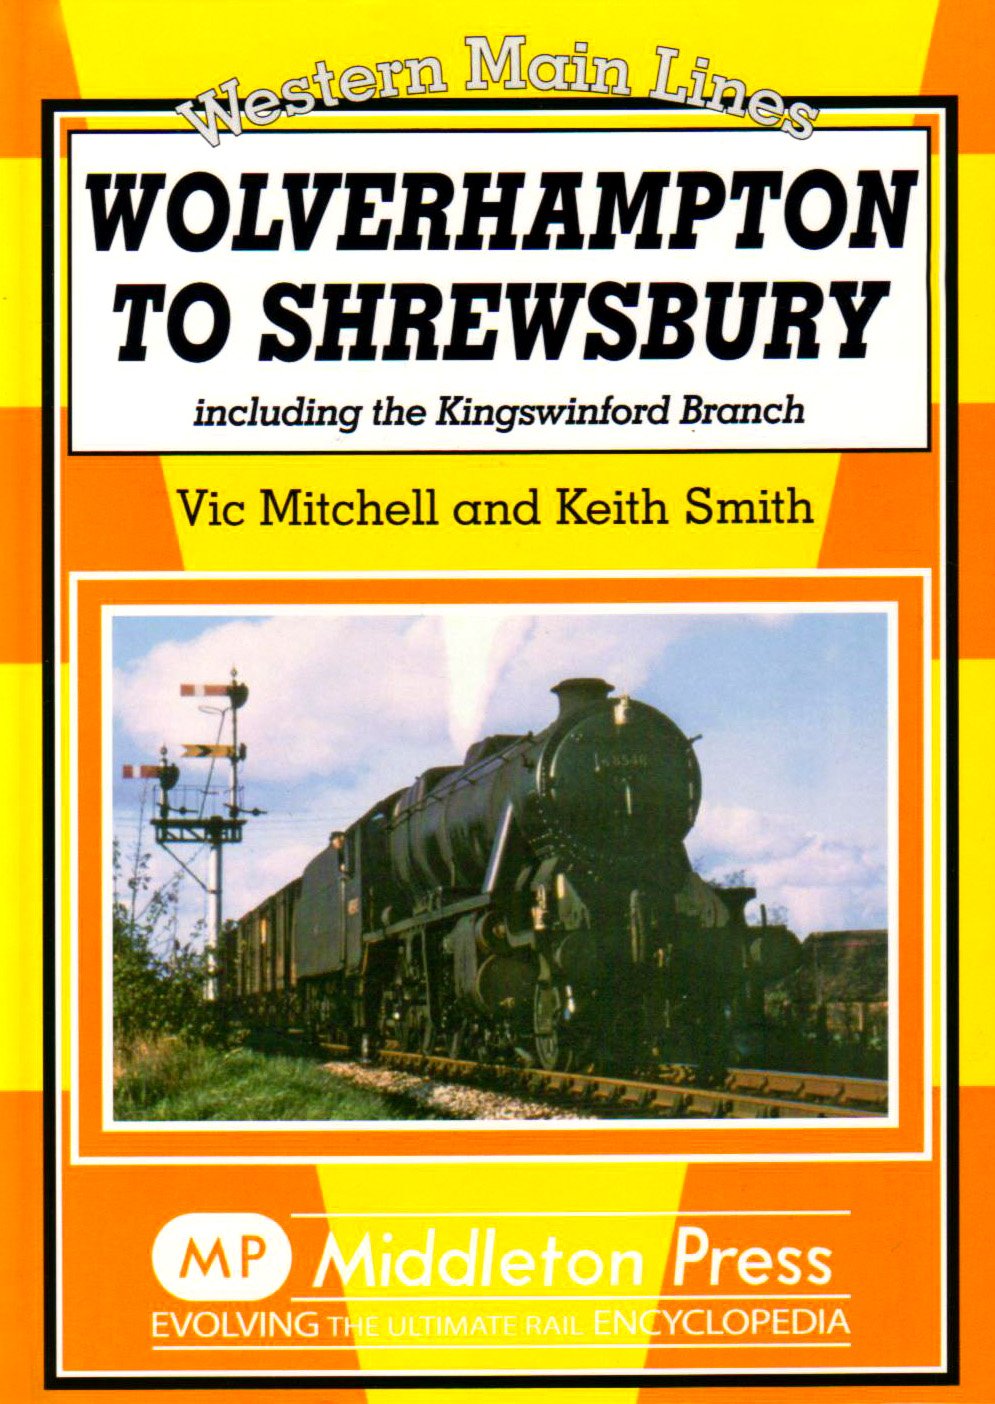 Western Main Lines Wolverhampton to Shrewsbury including the Kingswinford Branch